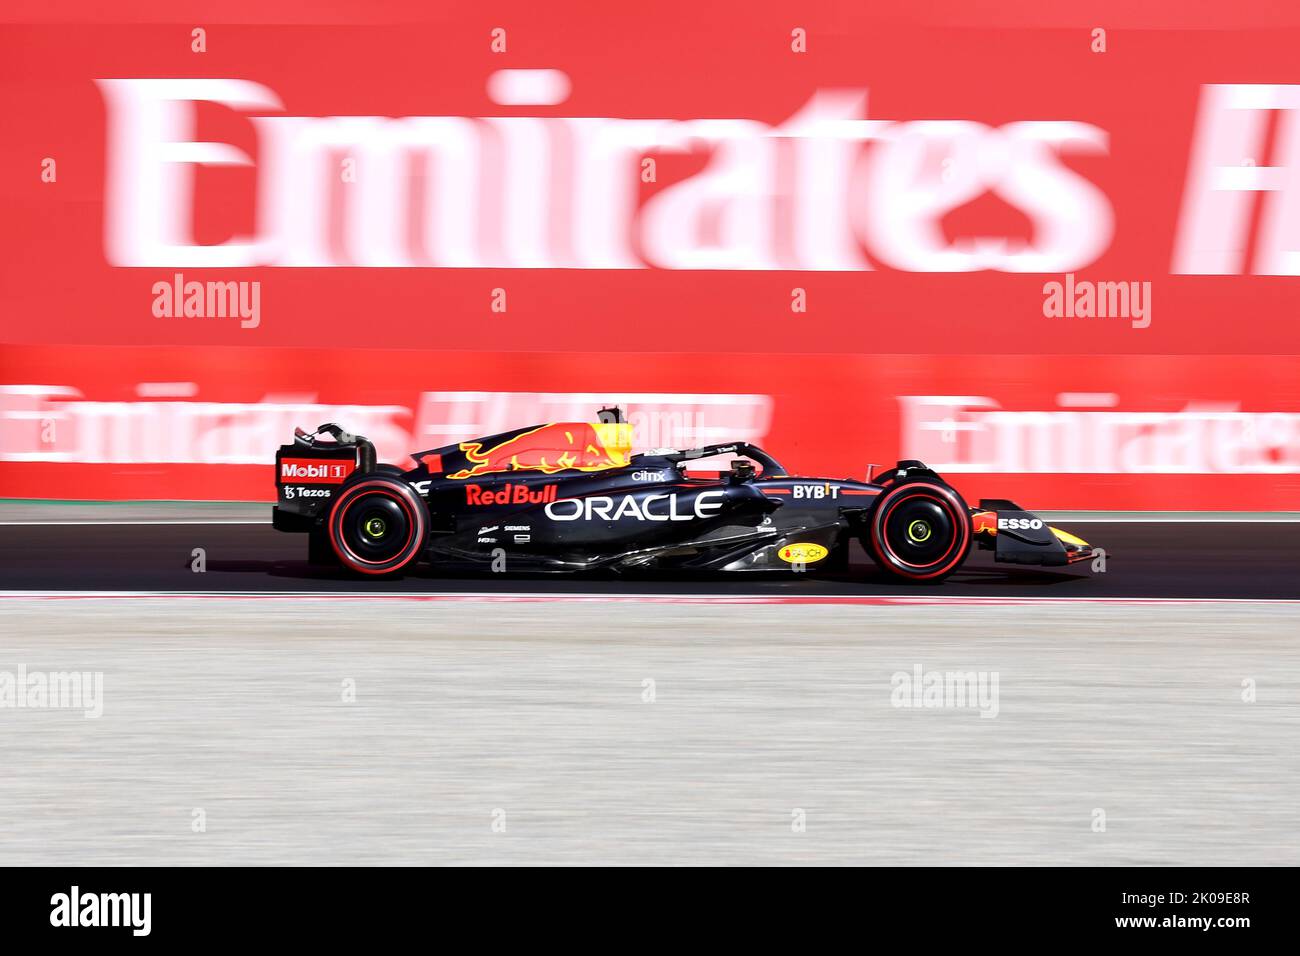 Max Verstappen of Red Bull Racing on track during qualifying for the F1 Grand Prix of Italy